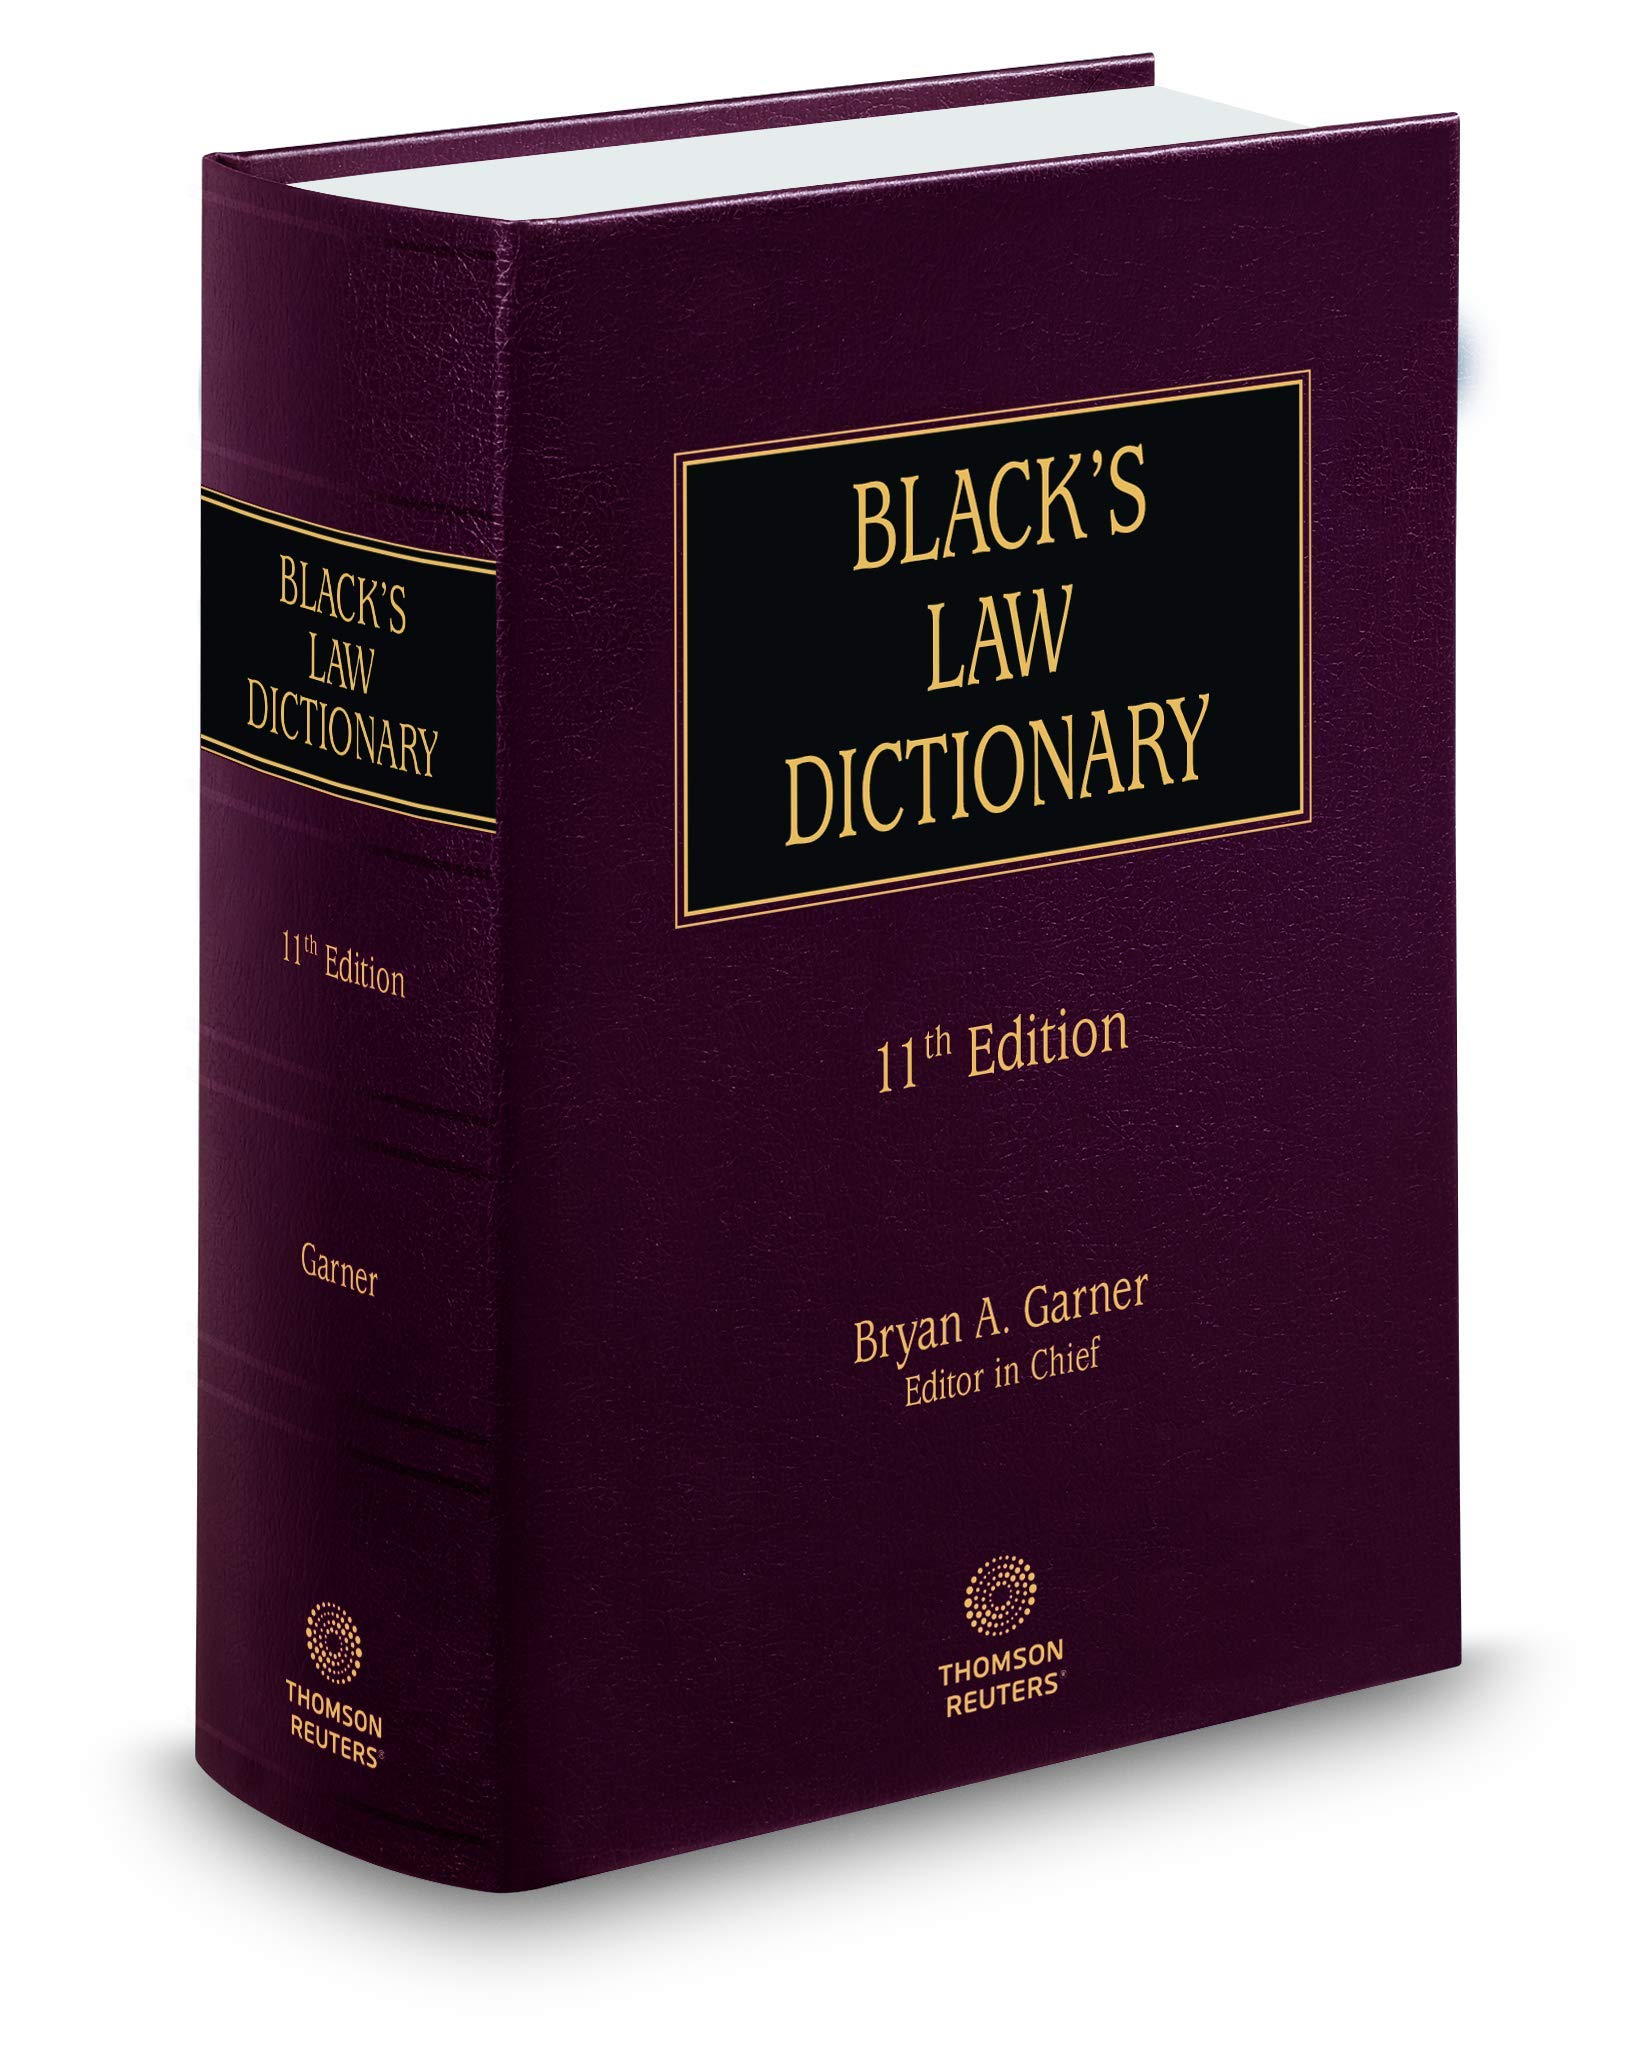 Black’s Law Dictionary, 11th Edition (BLACK'S LAW DICTIONARY (STANDARD EDITION))